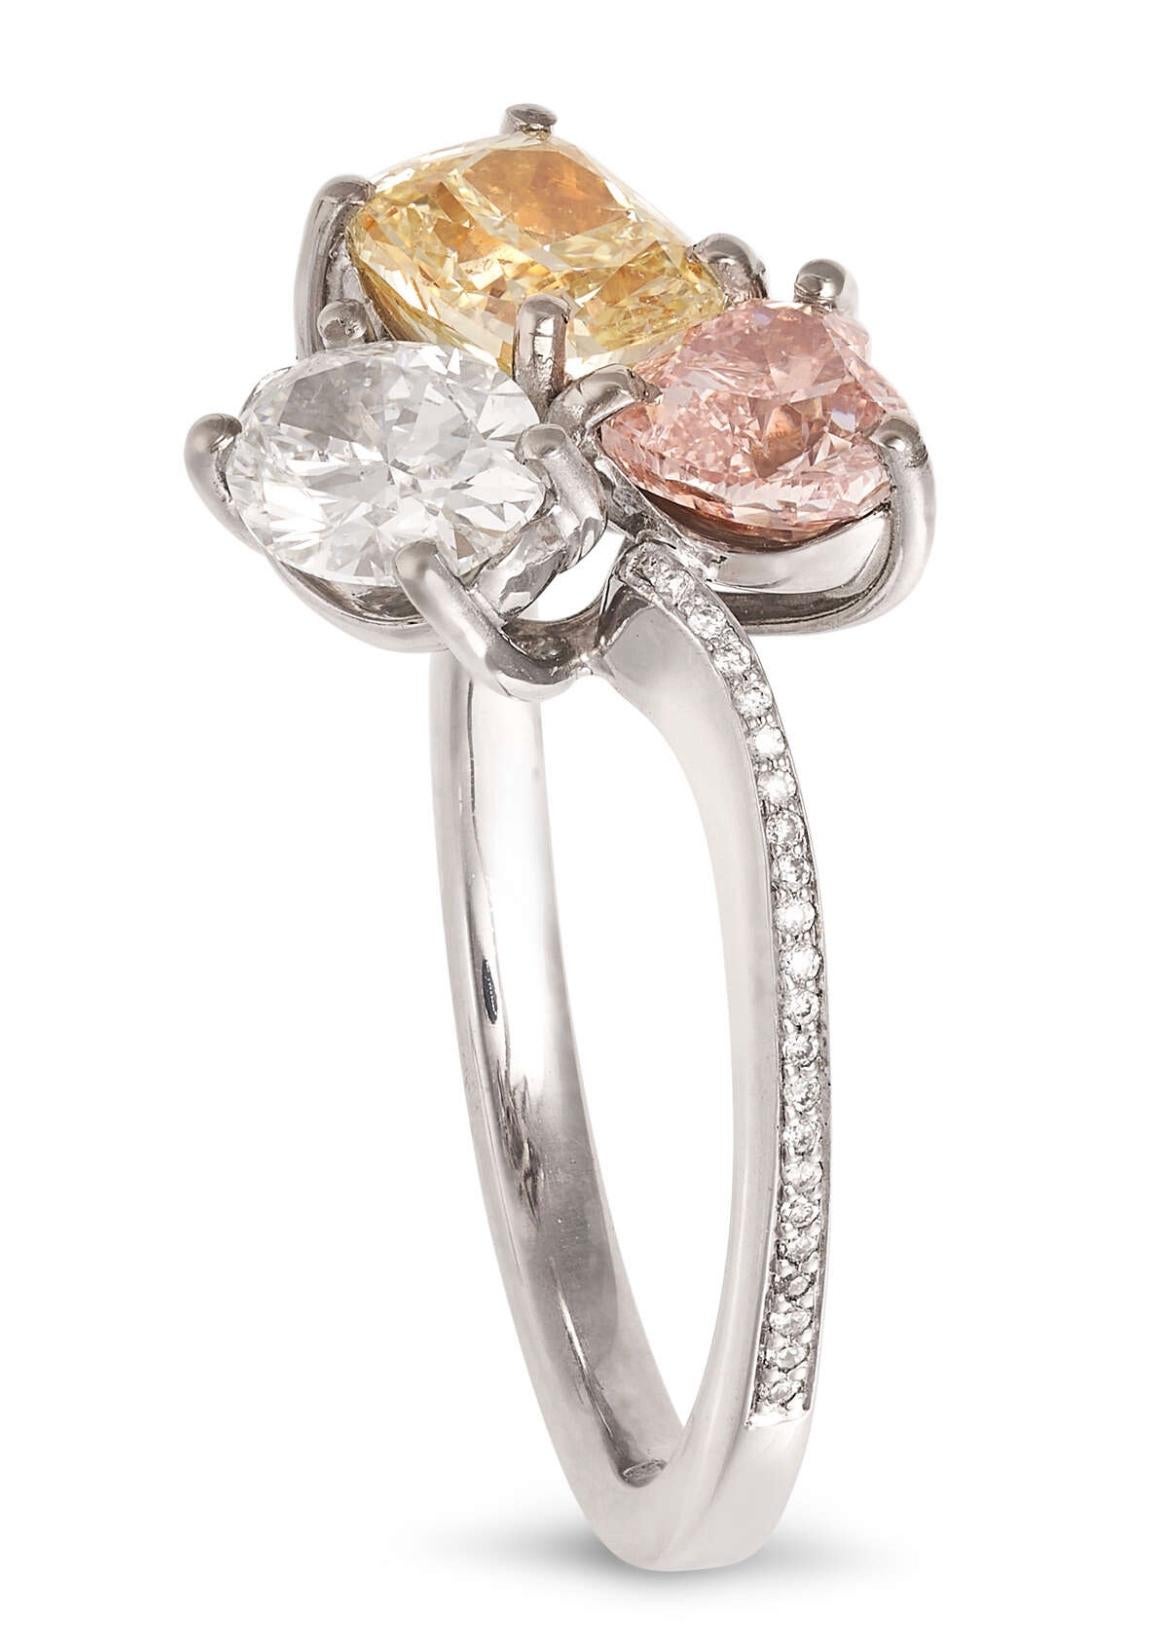 Description
A FANCY COLOURED DIAMOND DRESS RING BY SCARSELLI in 18ct white gold, set with a pink heart cut diamond of 0.63 carats, an oval cut diamond of 0.60 carats and a cushion cut yellow diamond of 0.90 carats, the band accented by round cut